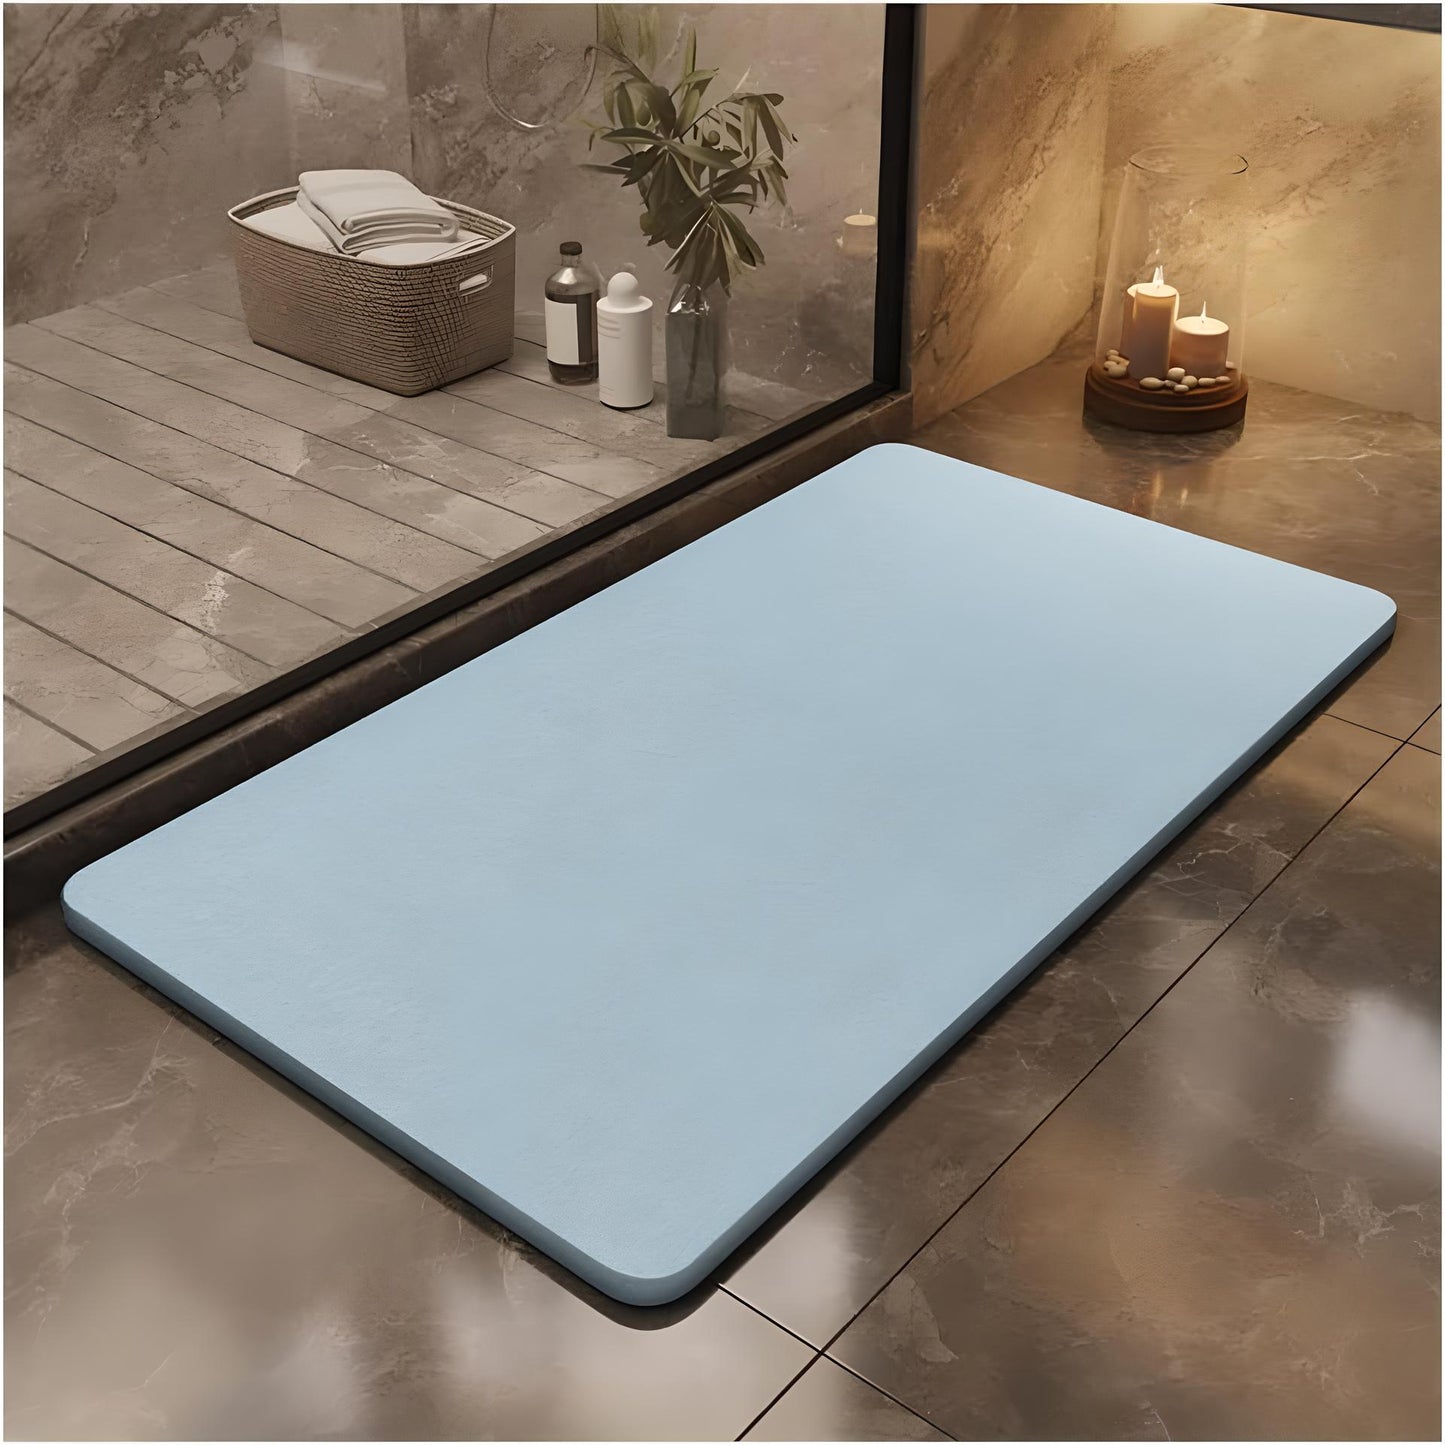 Diatomaceous Stone Ultra Absorbent & Self-cleaning Bath Mat